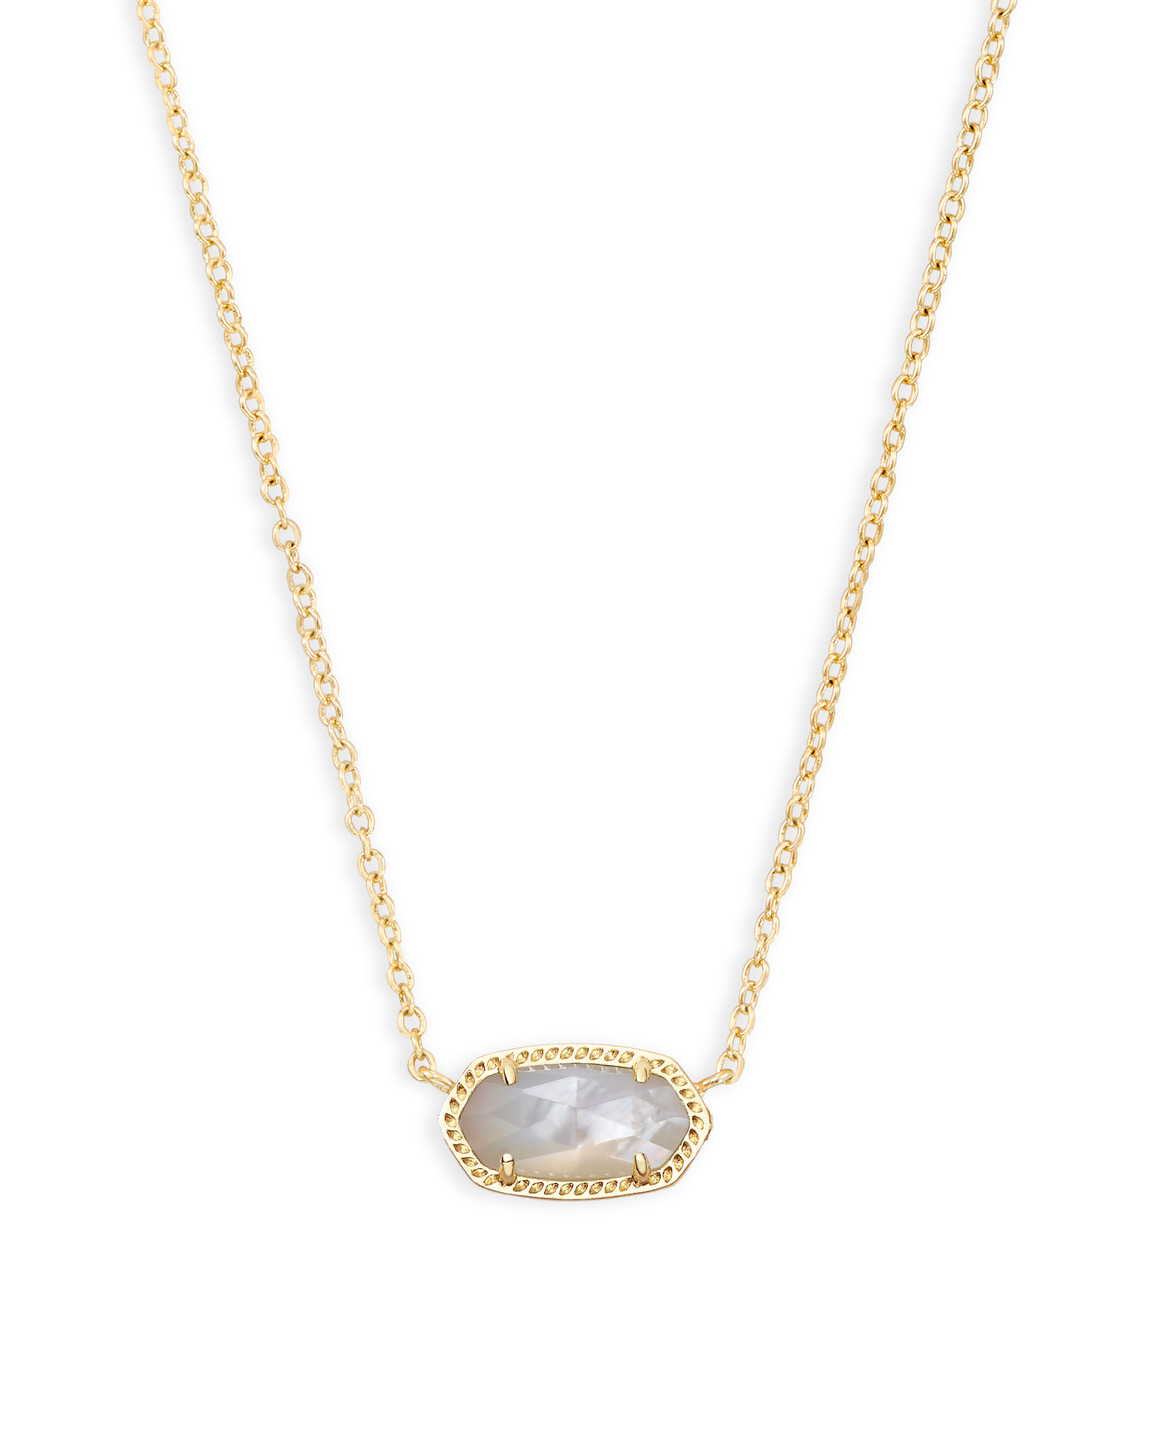 Kendra-Scott-Elisa-Necklace-Gold-Tone-Mother-of Pearl